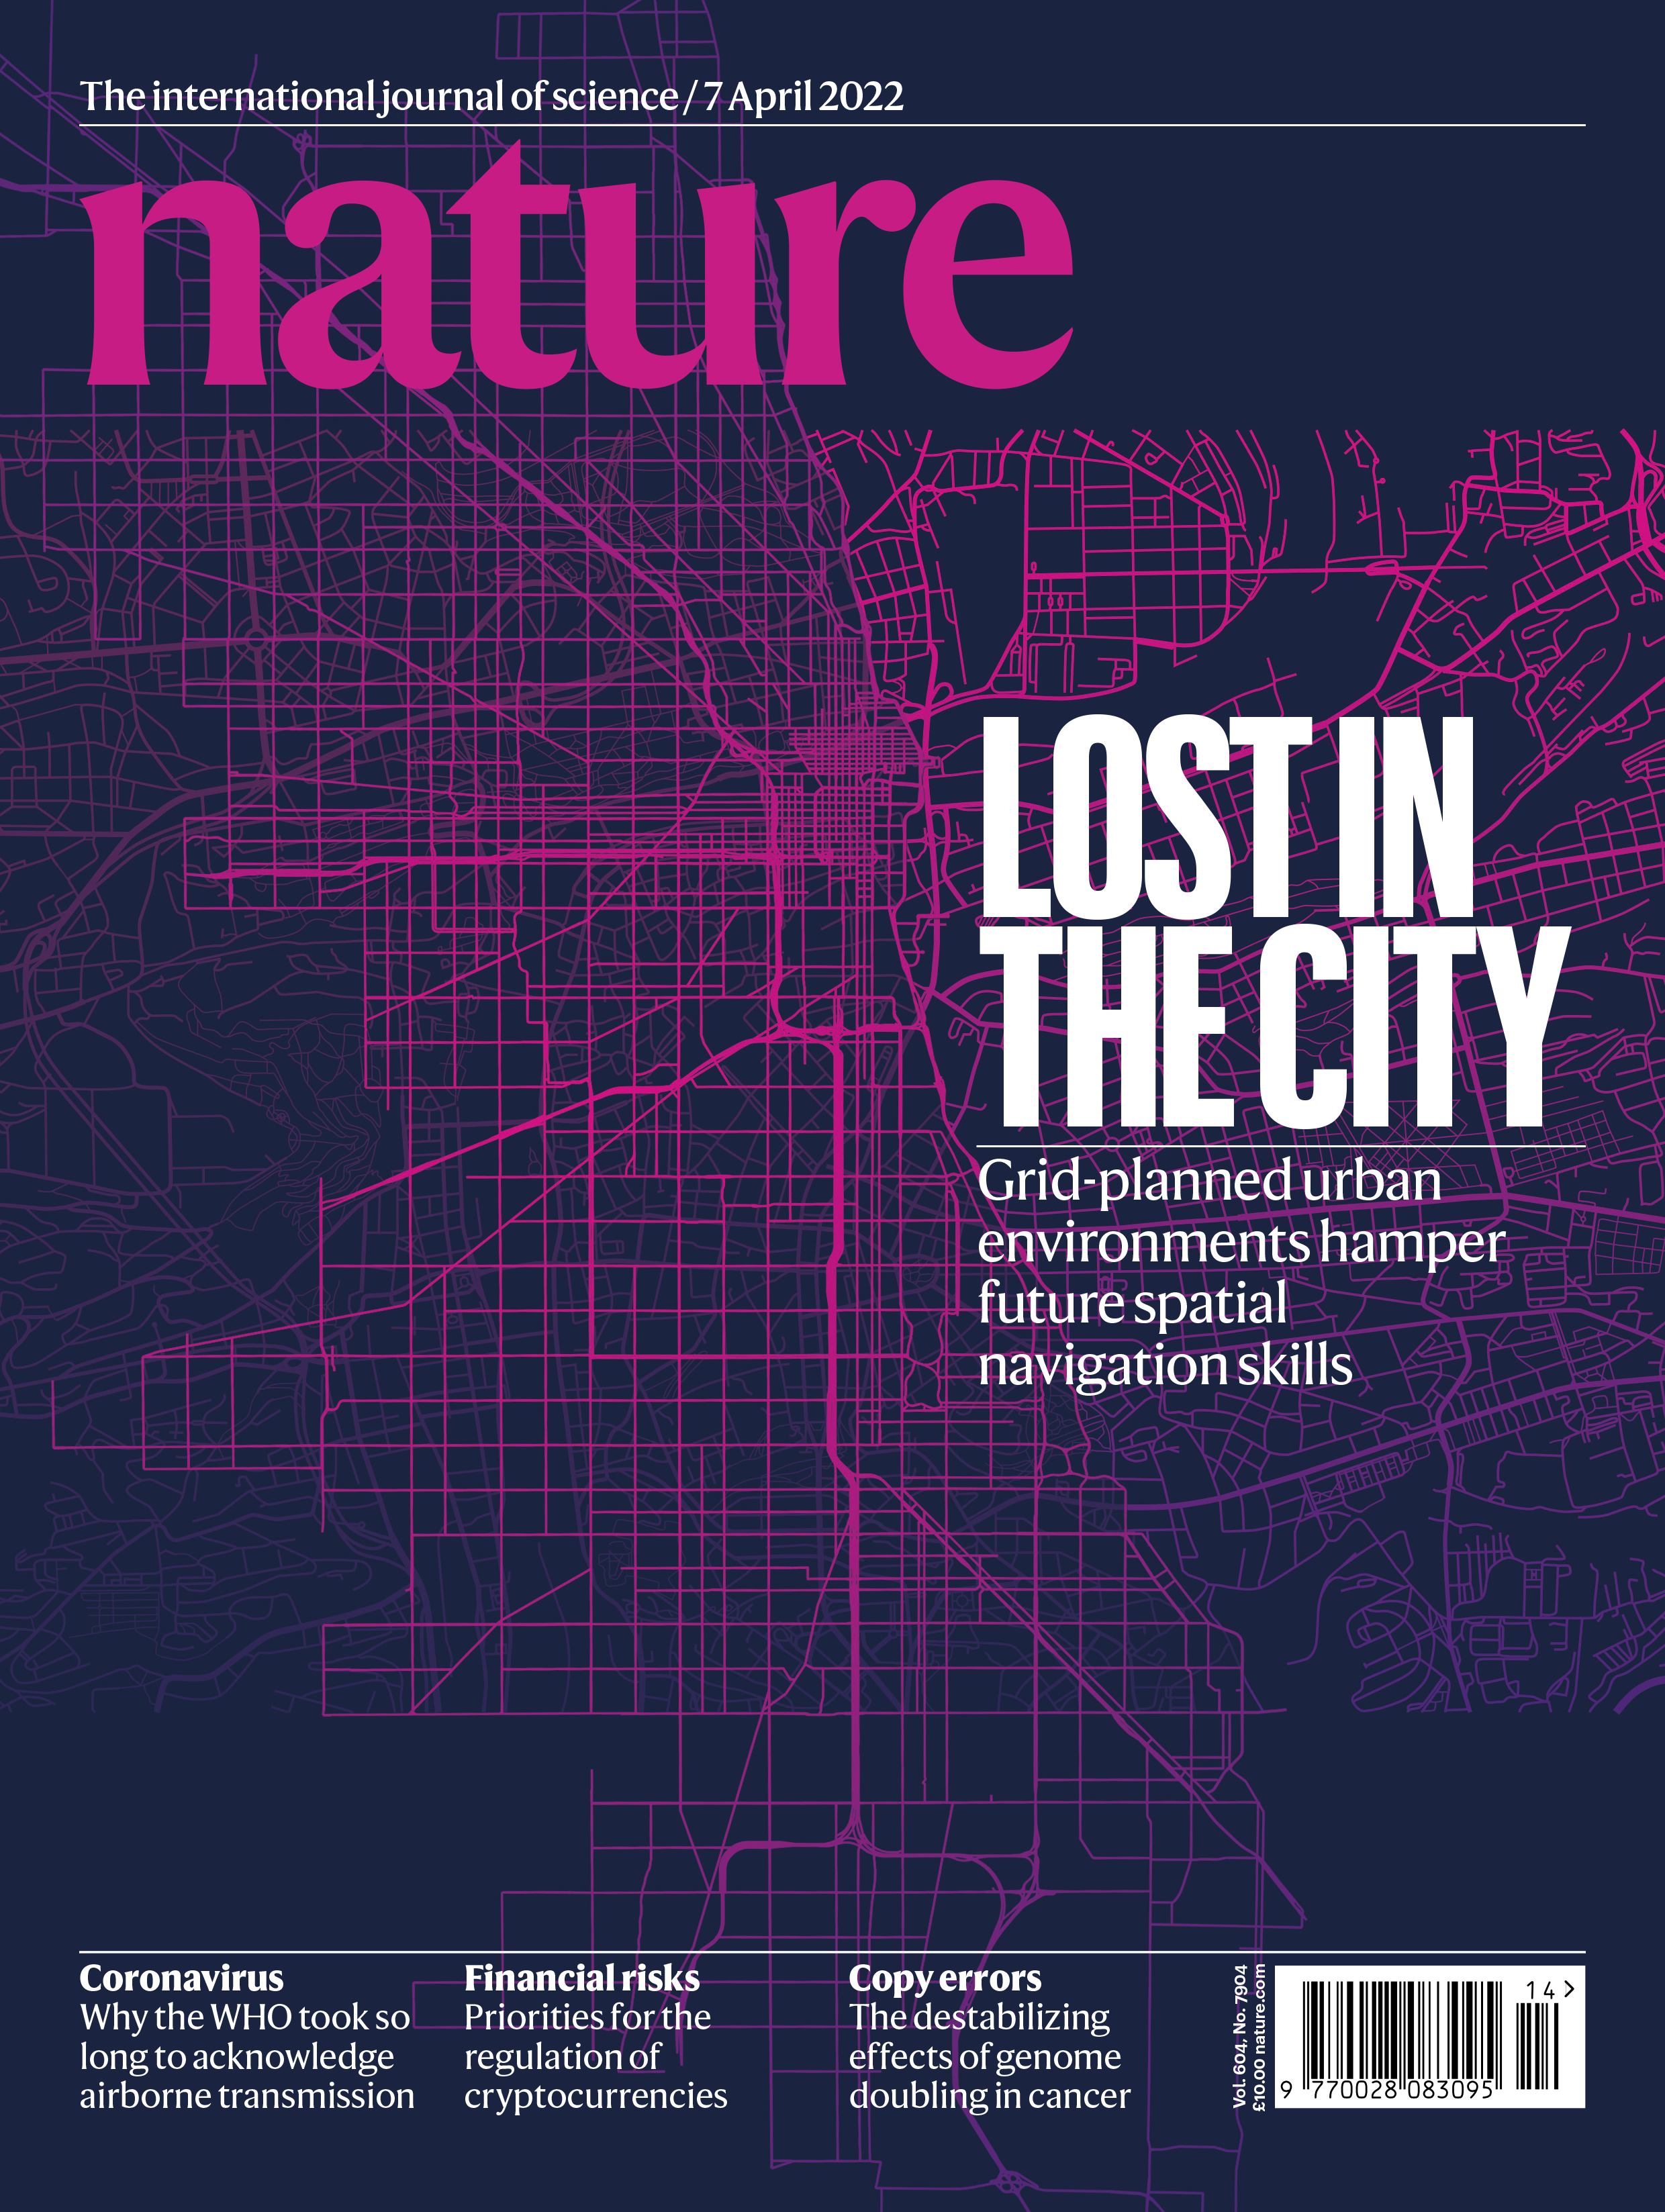 Cover image for Nature science journal 7-4-22